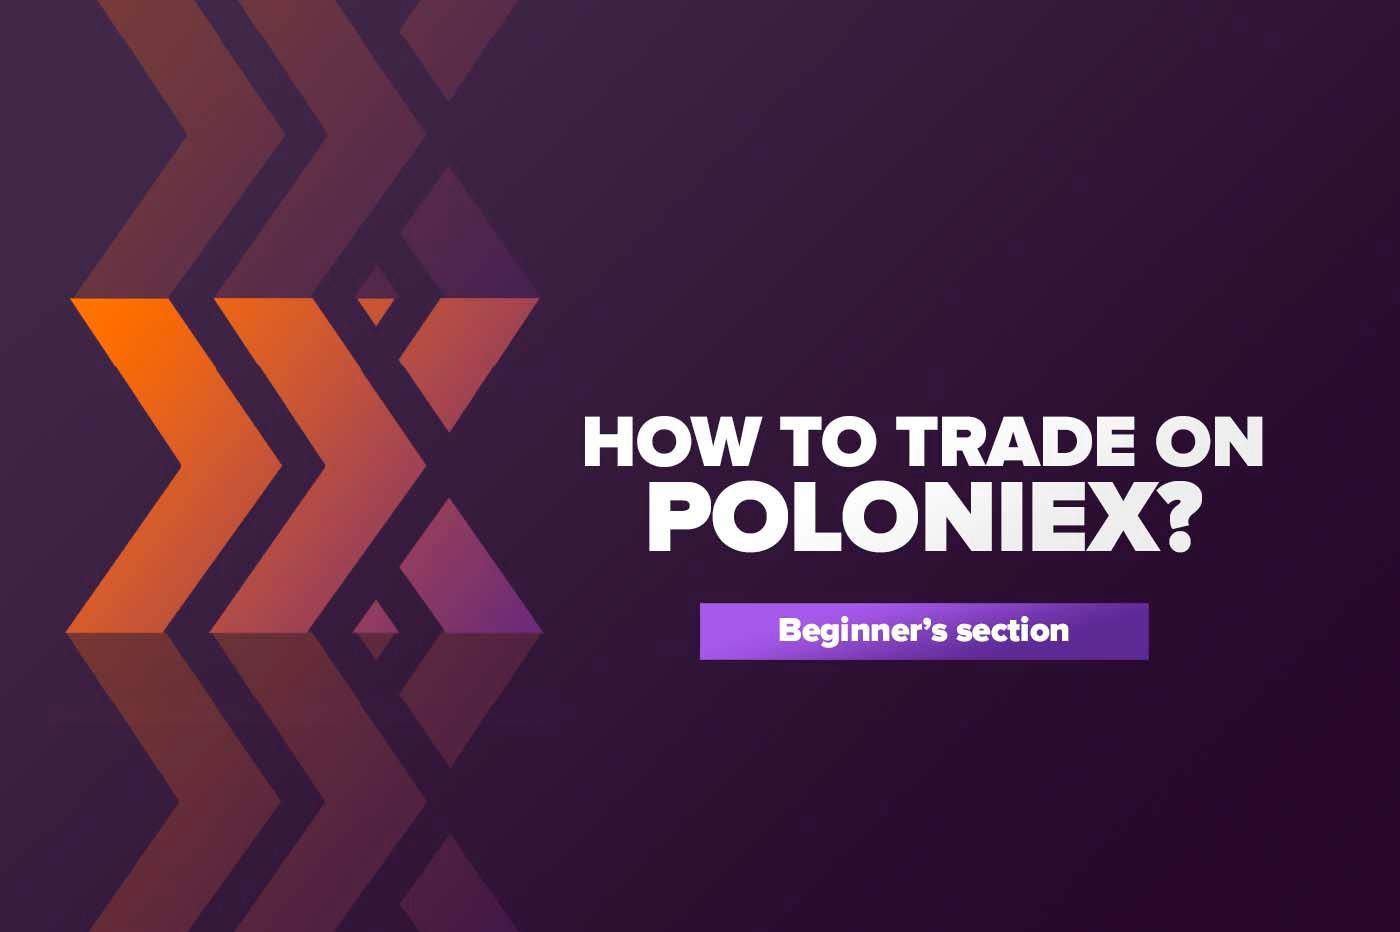 How to trade on Poloniex?